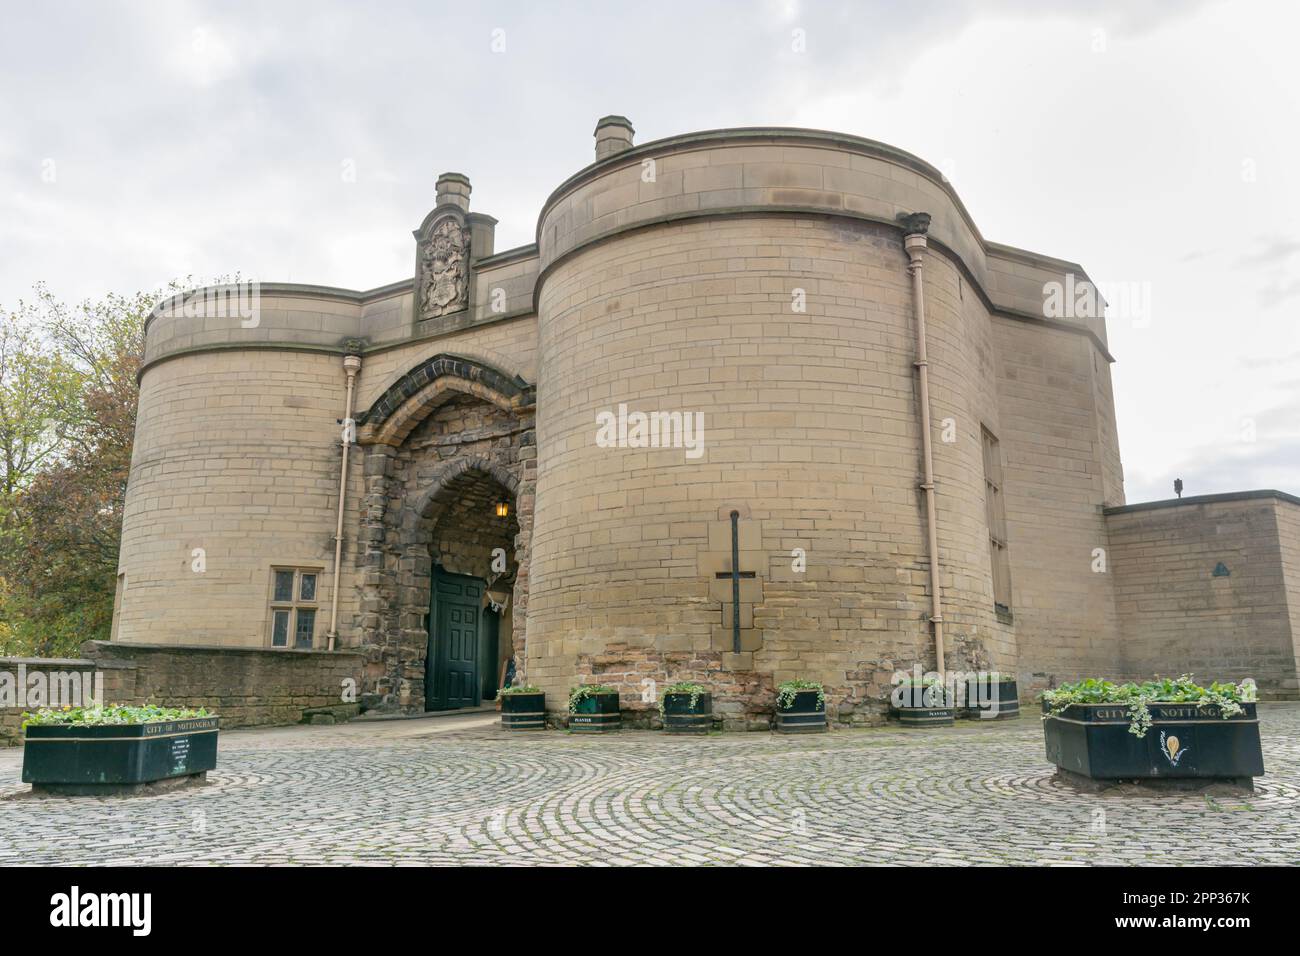 The gatehouse was built when an outer bailey was added during the Middle Ages to Nottingham Castle, which was established in 1068. Stock Photo